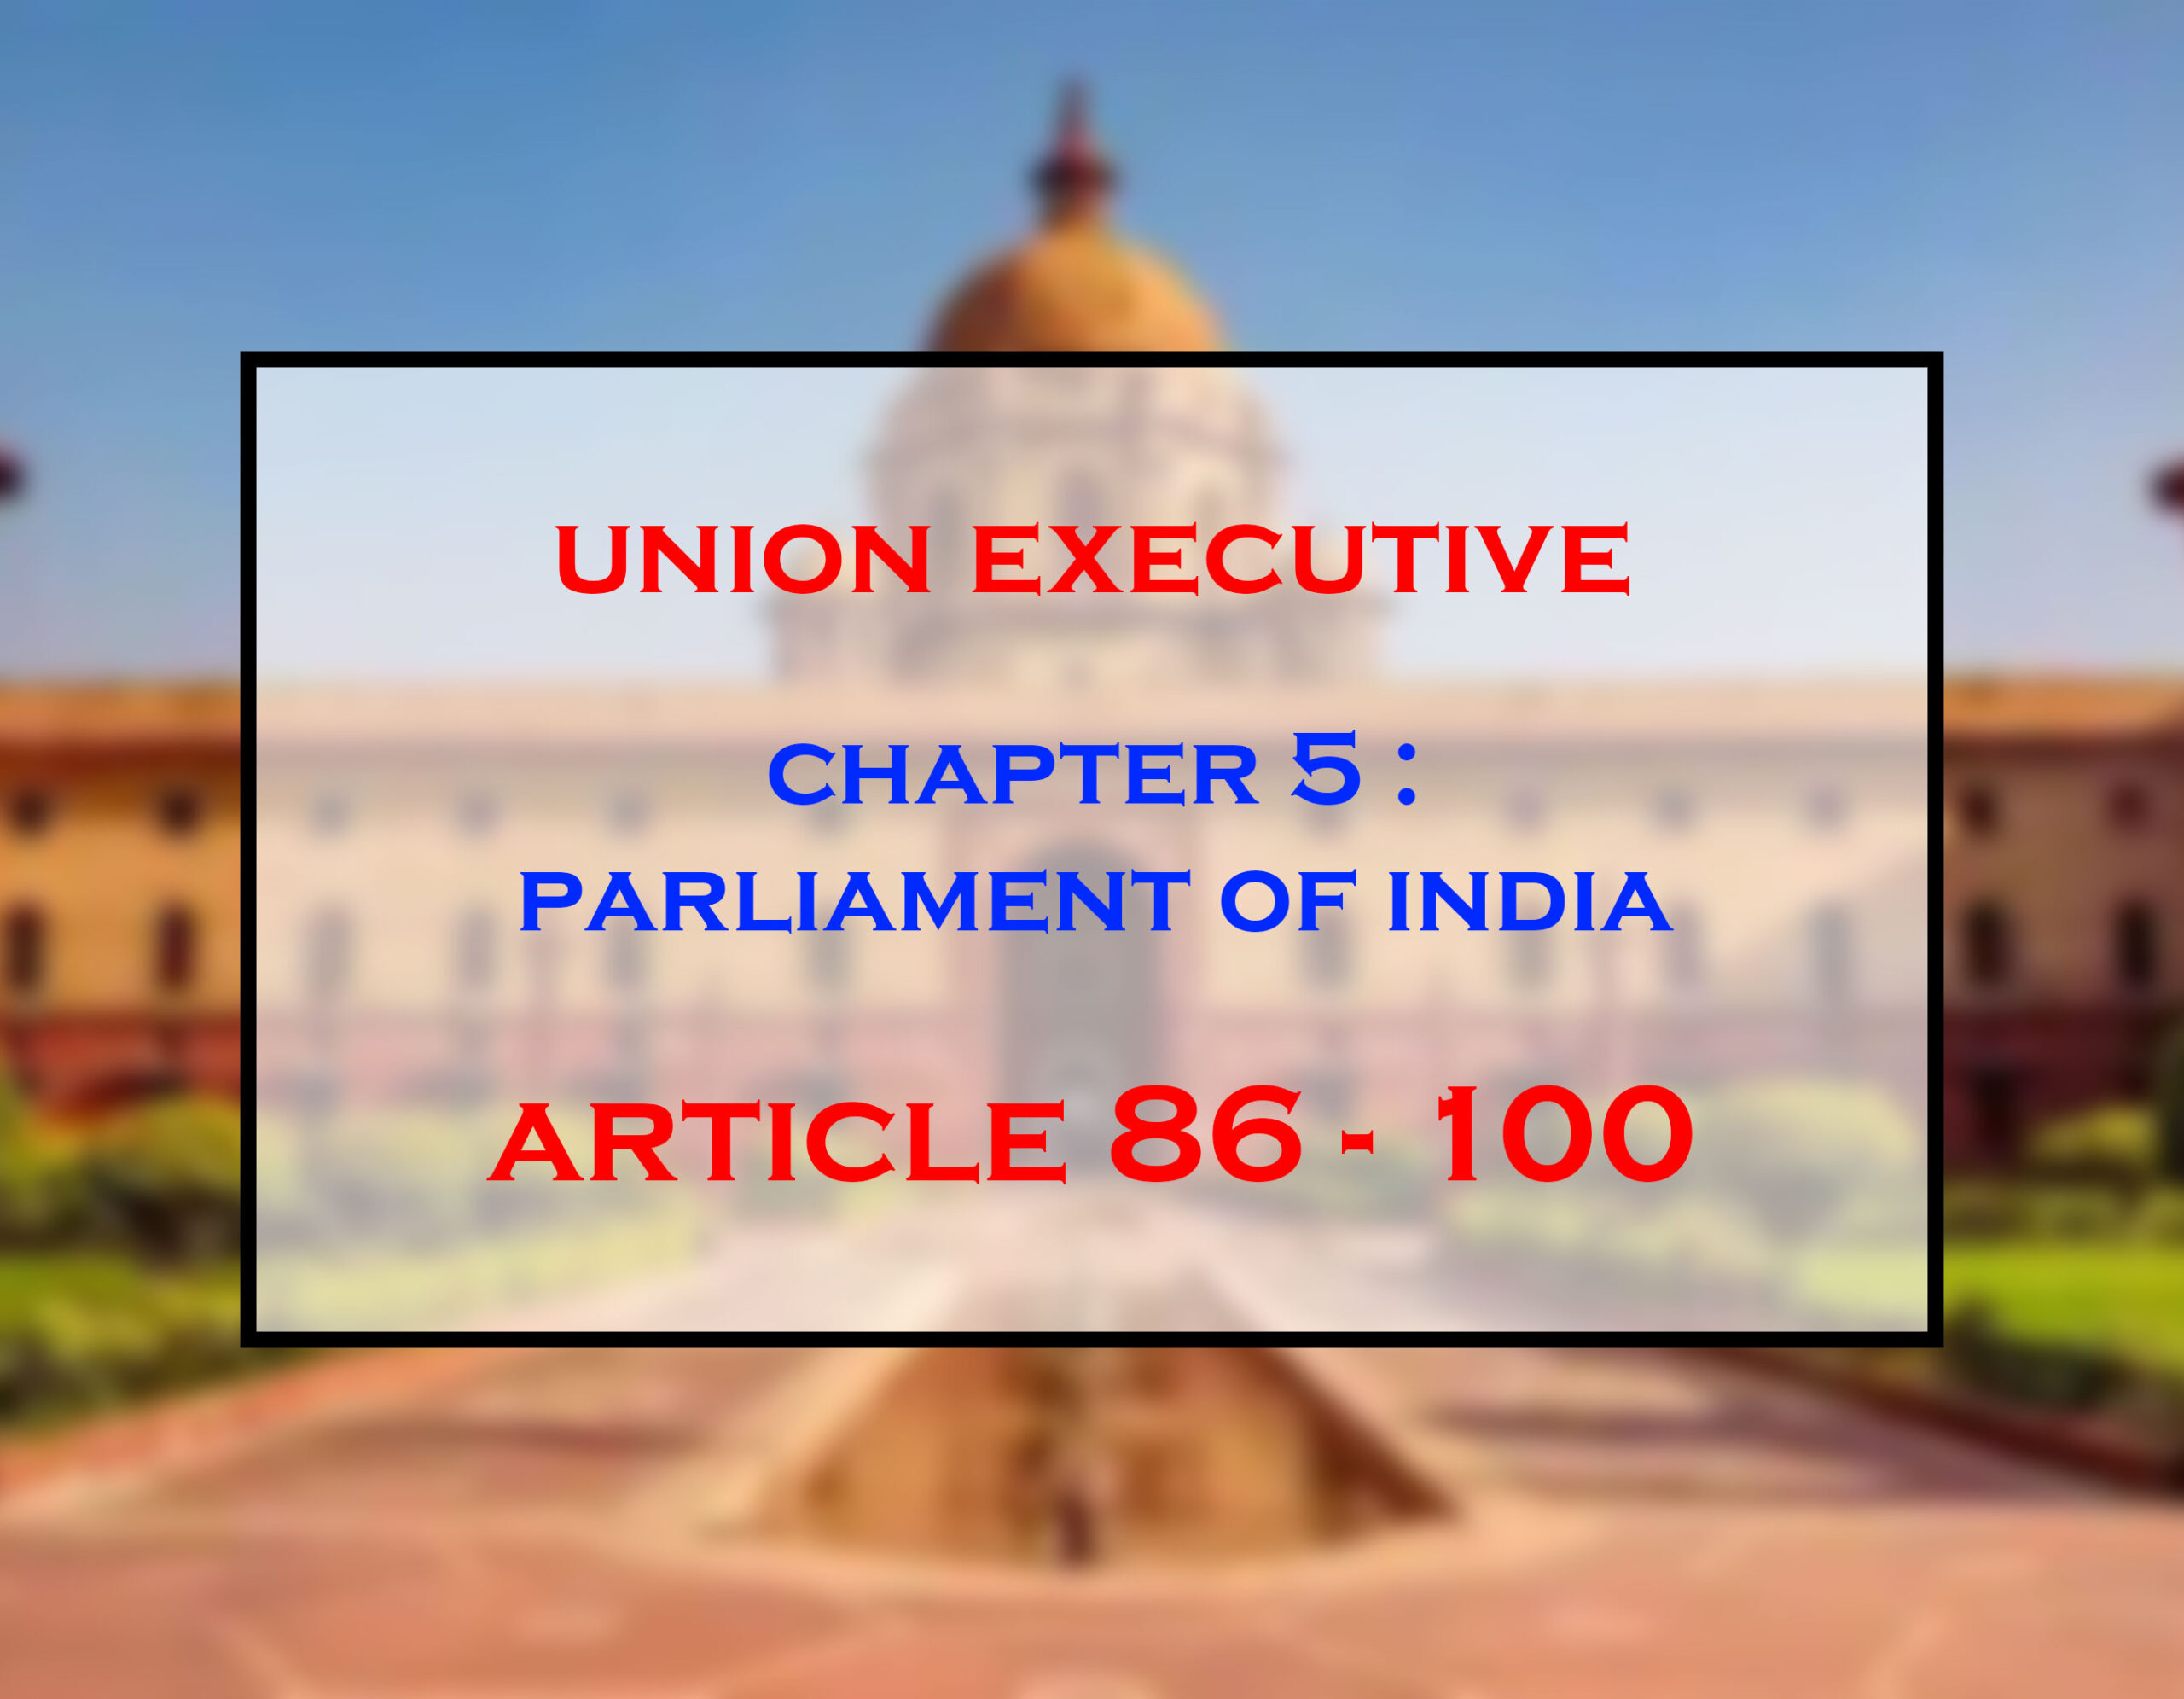 Parliament of India (Article 86 – 100)